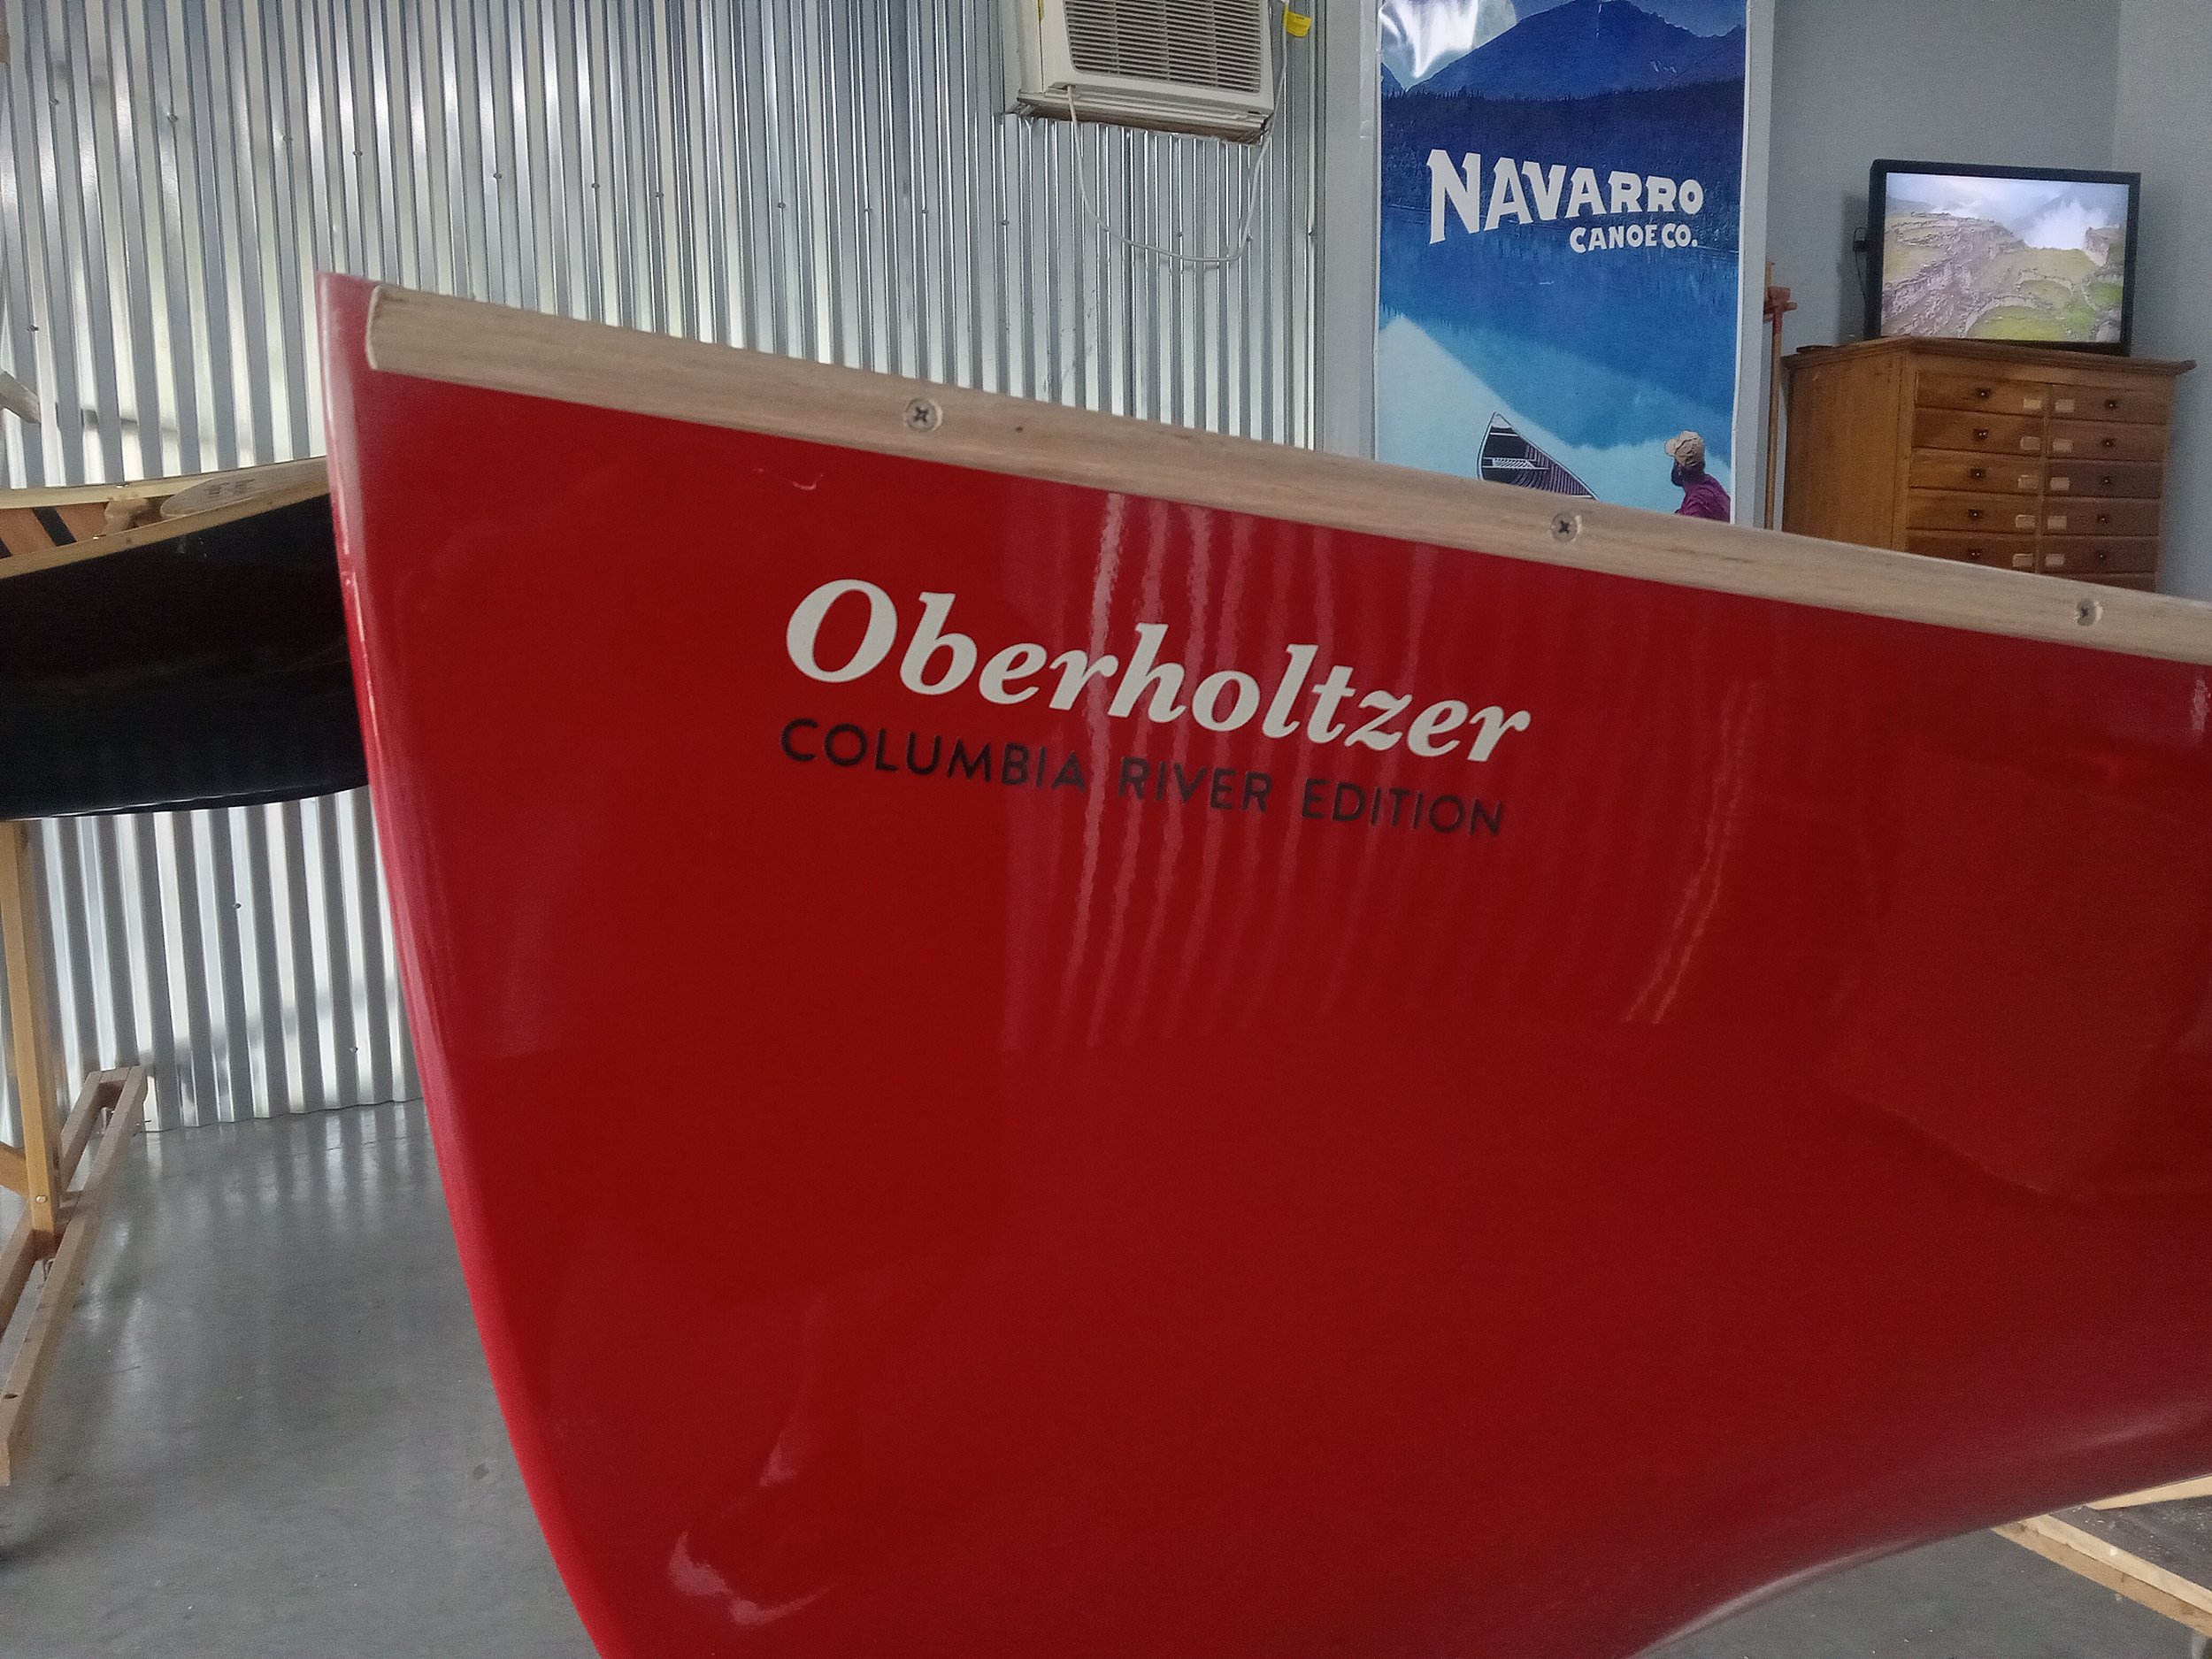 Oberholzter Columbia River Edition Decals Bow 20230509_170340.jpg